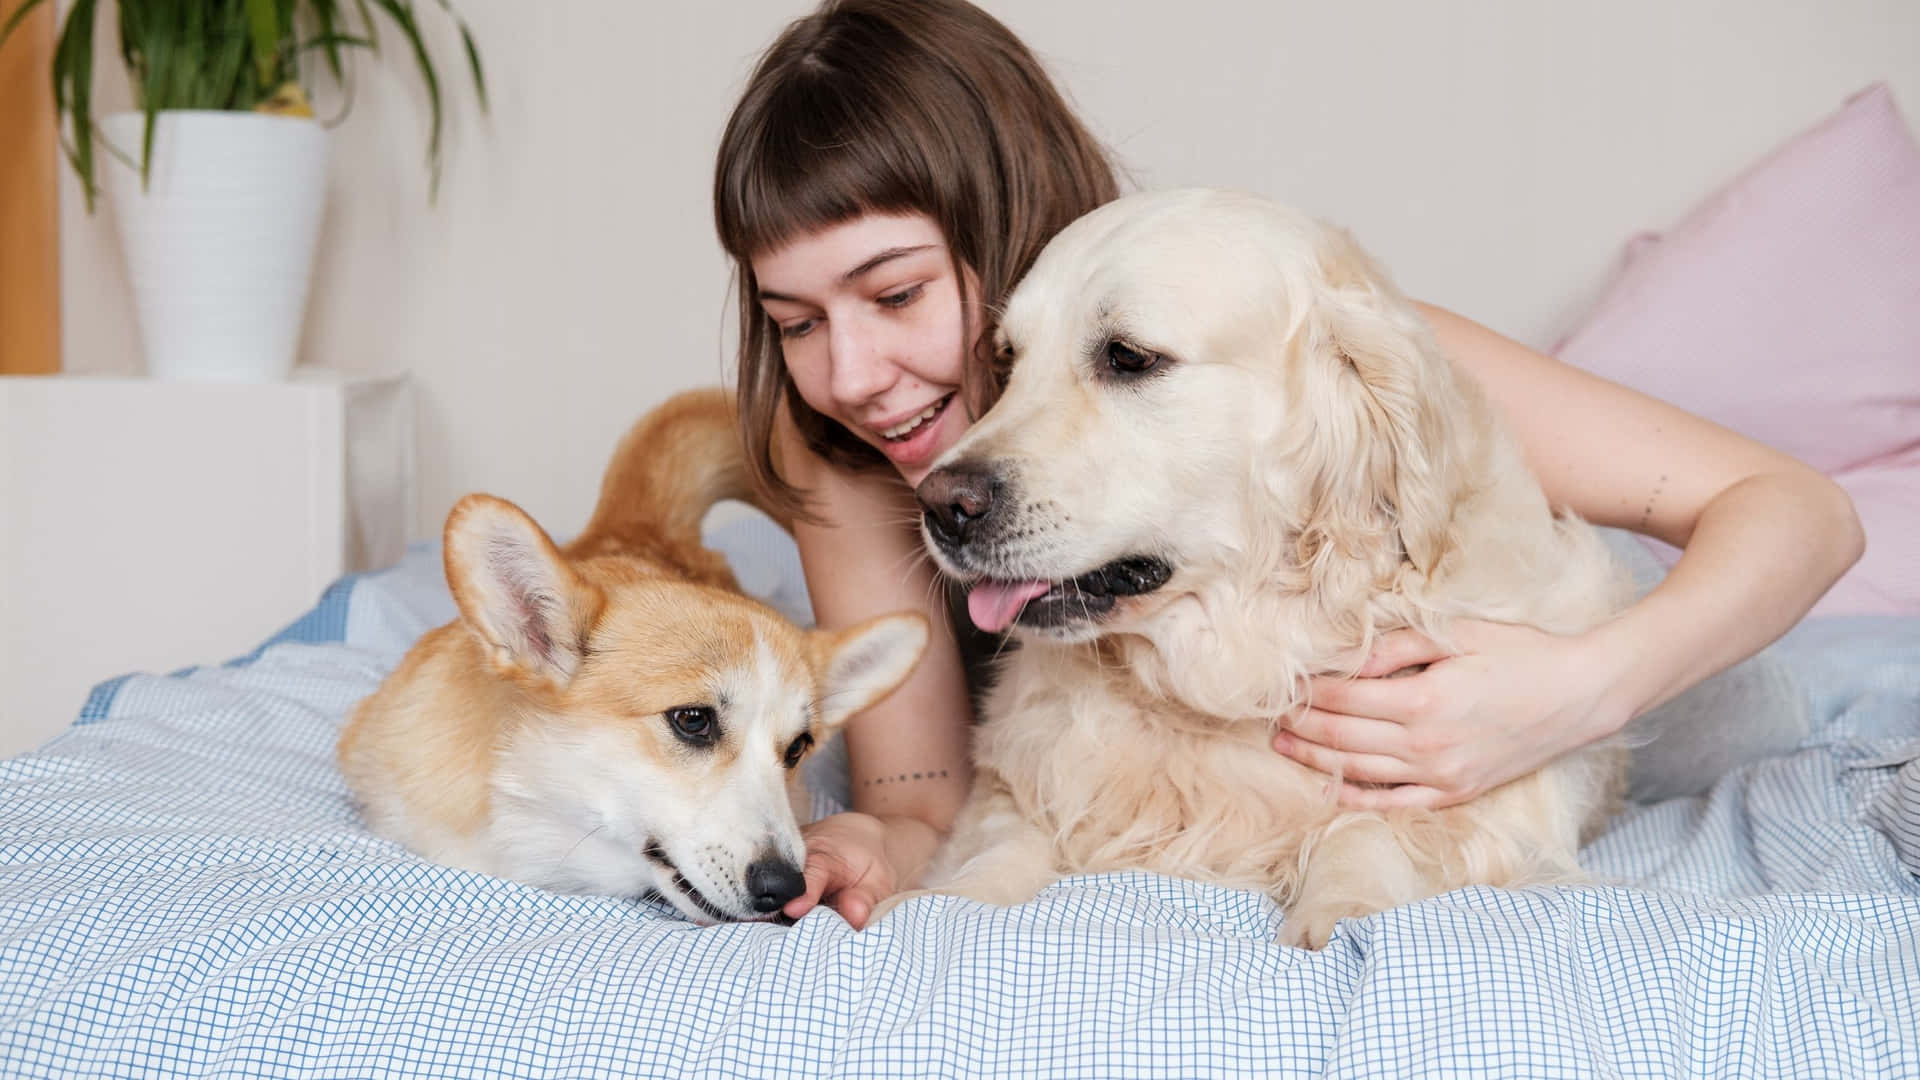 A Woman Is Petting Her Dog While Sitting On A Bed